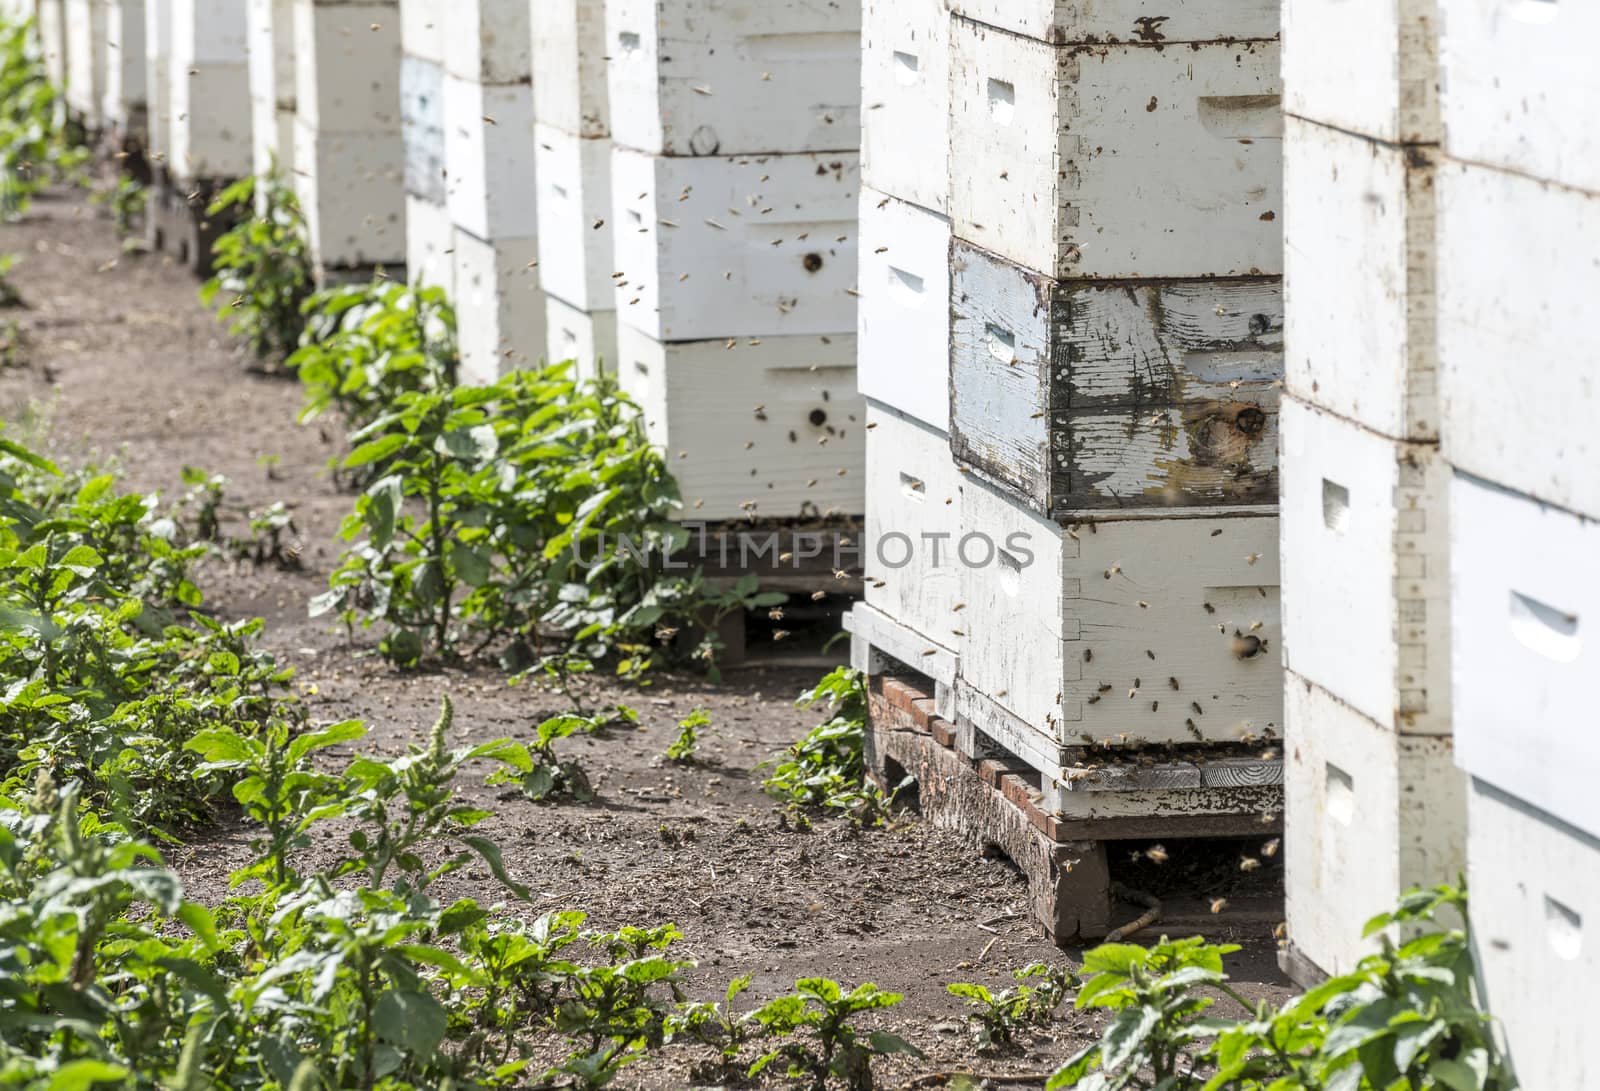 Honey bees entering and exiting hives by TSLPhoto